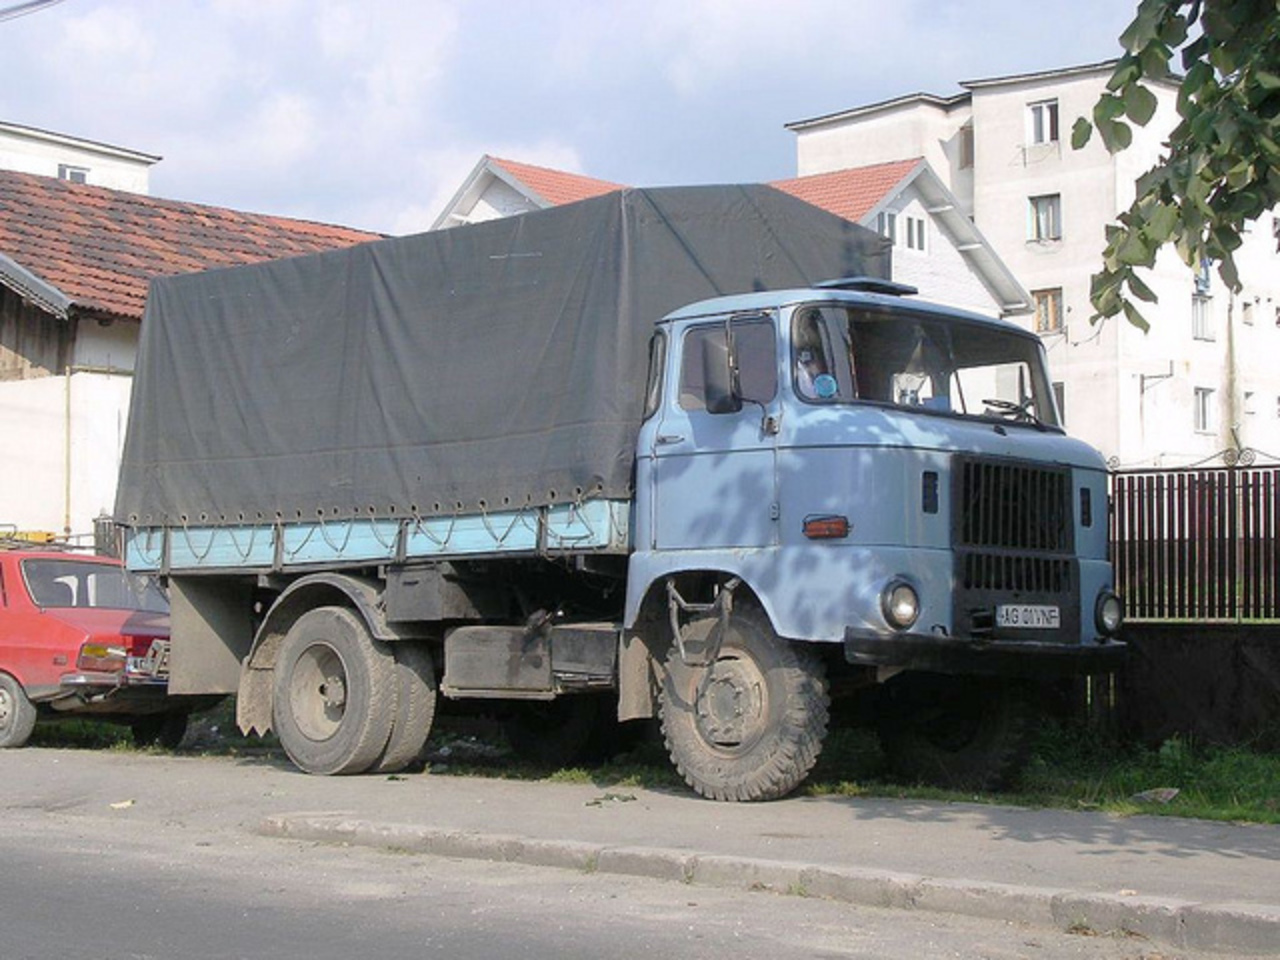 IFA W50 Campulung Muscel Romania | Flickr - Photo Sharing!